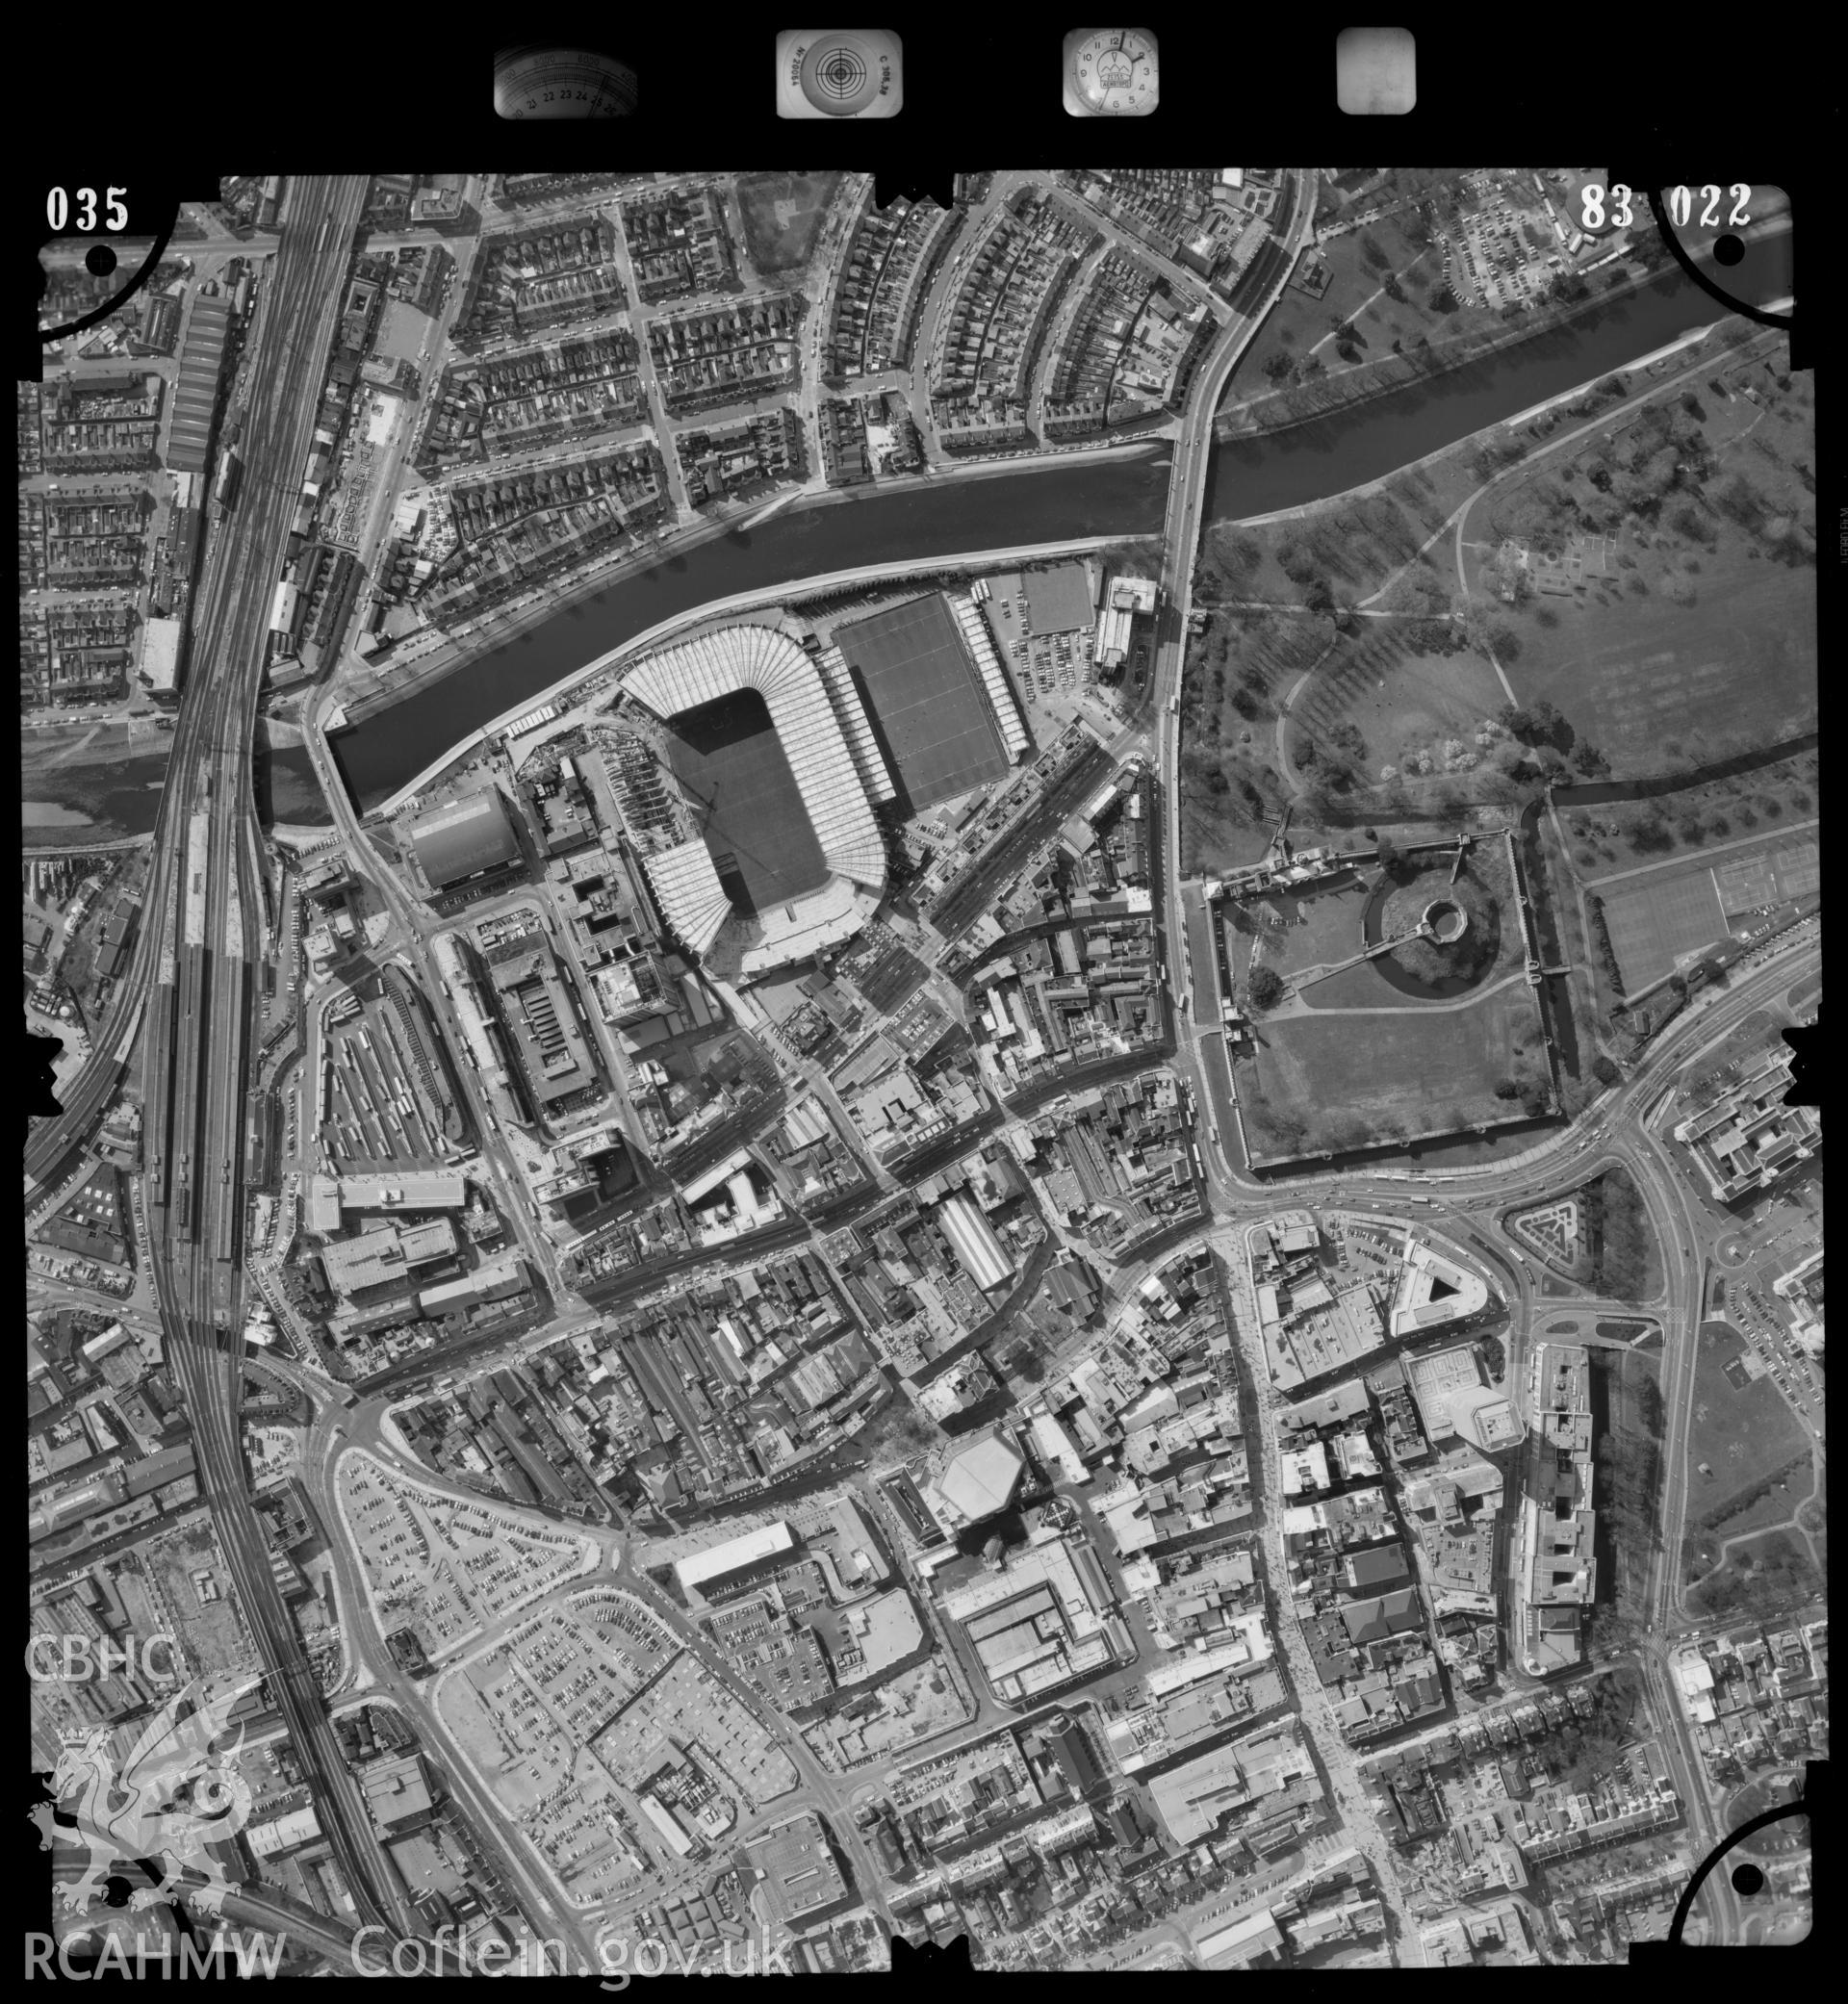 Digitized copy of an aerial photograph showing the Riverside area in Cardiff, taken by Ordnance Survey, 1983.